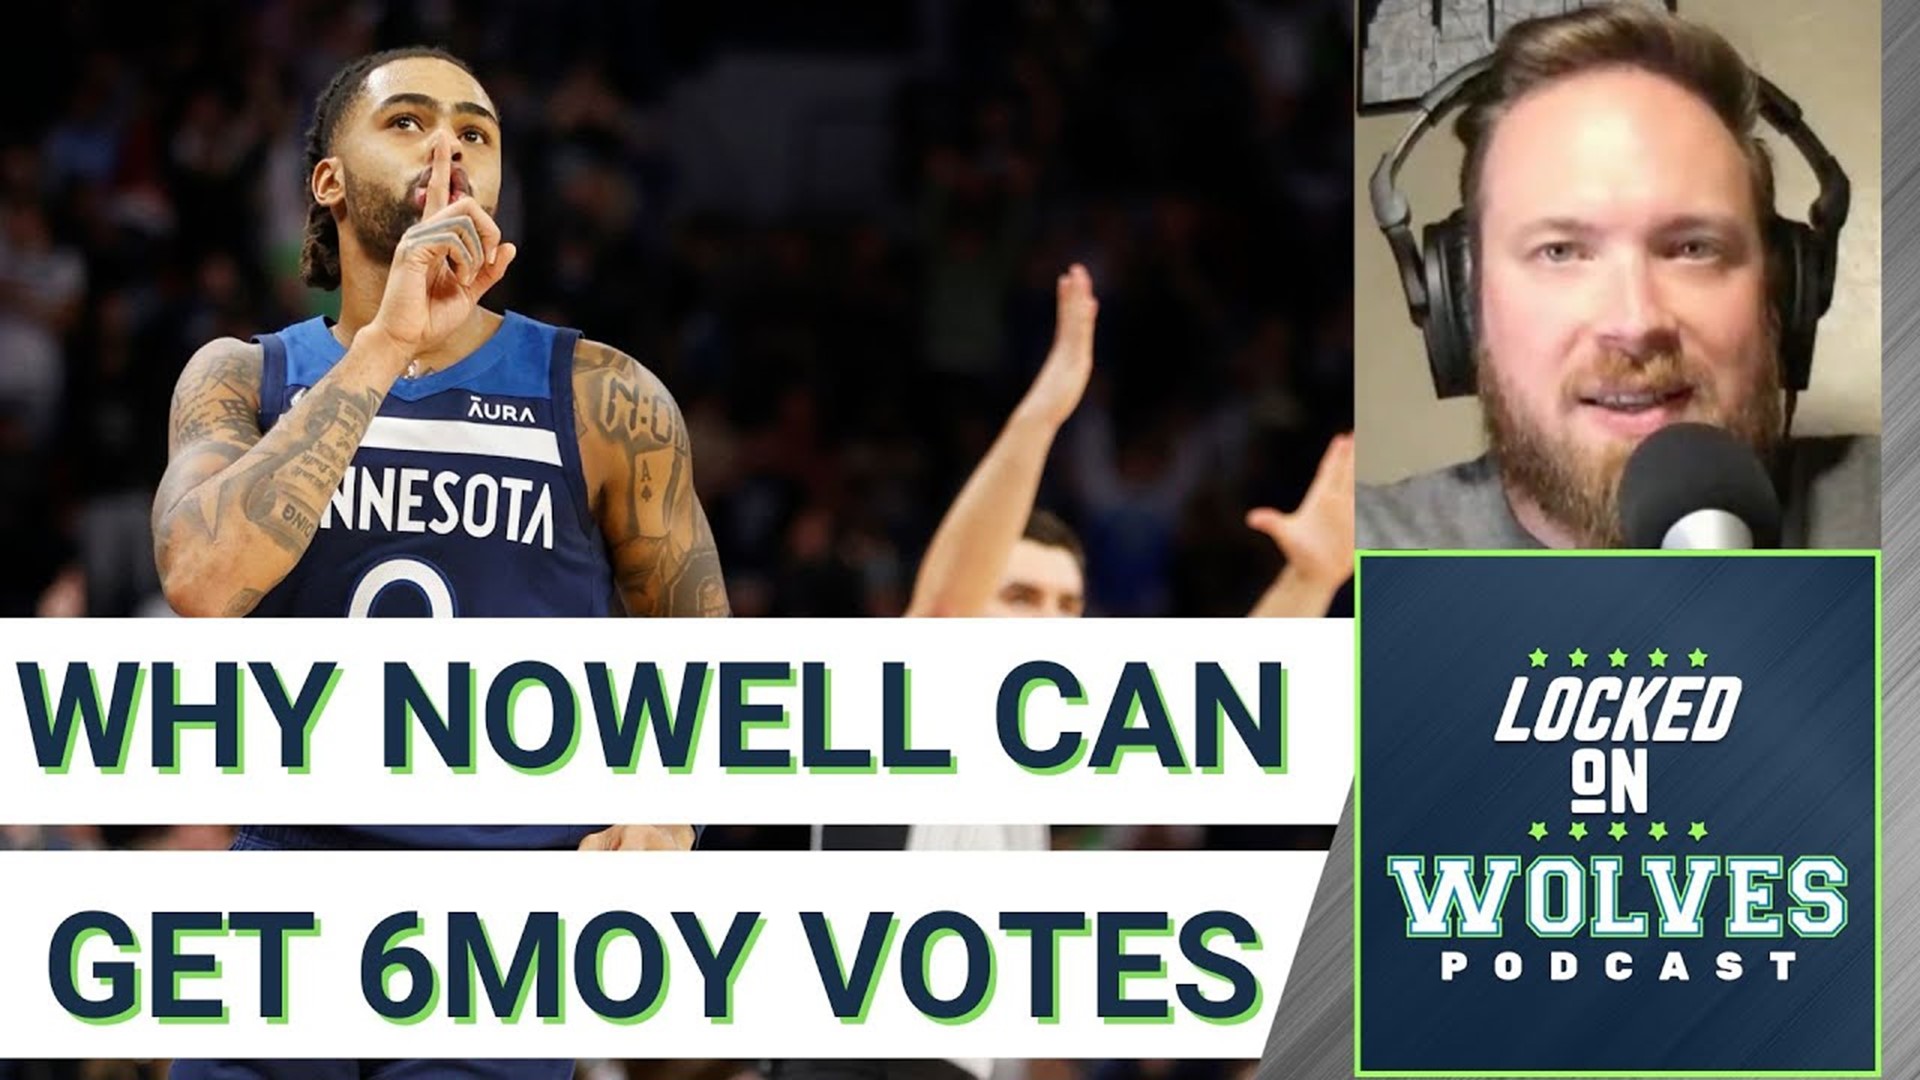 Why Minnesota Timberwolves guard Jaylen Nowell will get votes for the Sixth Man of the Year Award